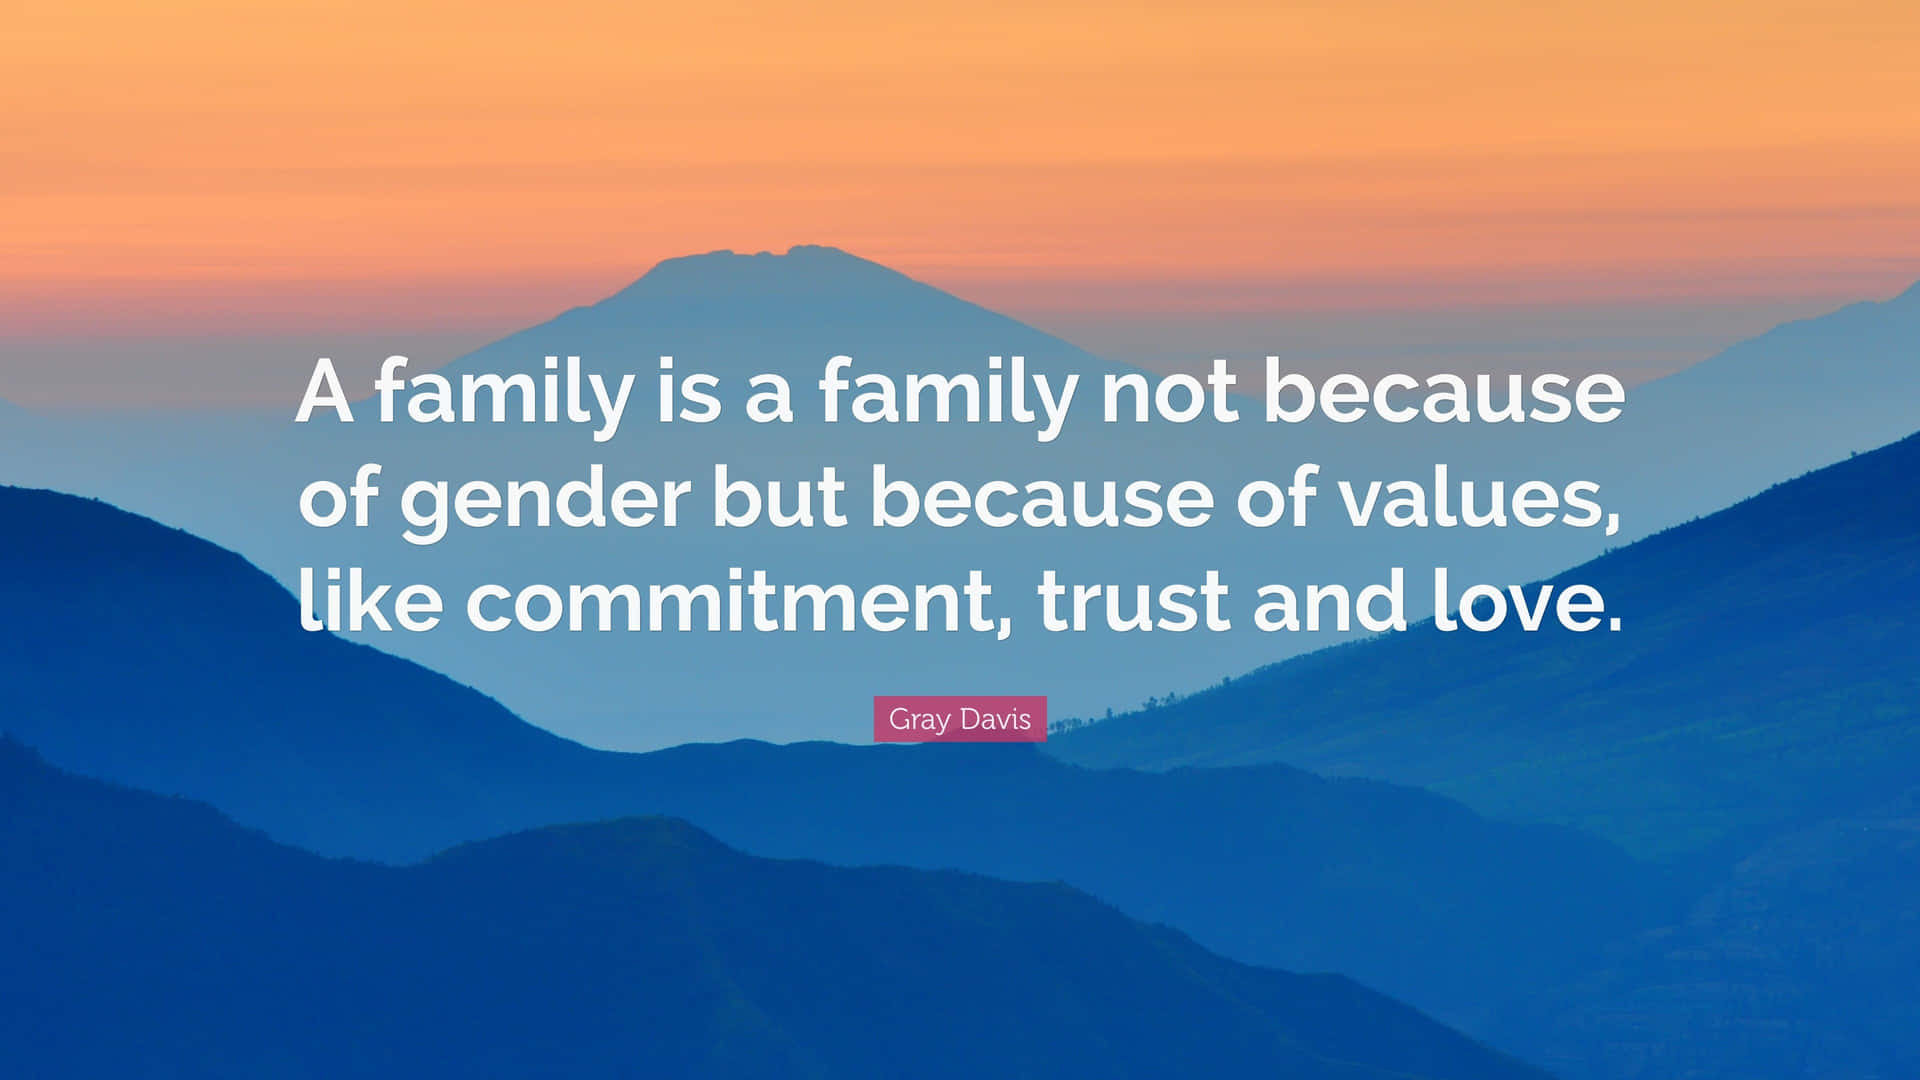 Family Values Commitment Trust Love Quote Wallpaper